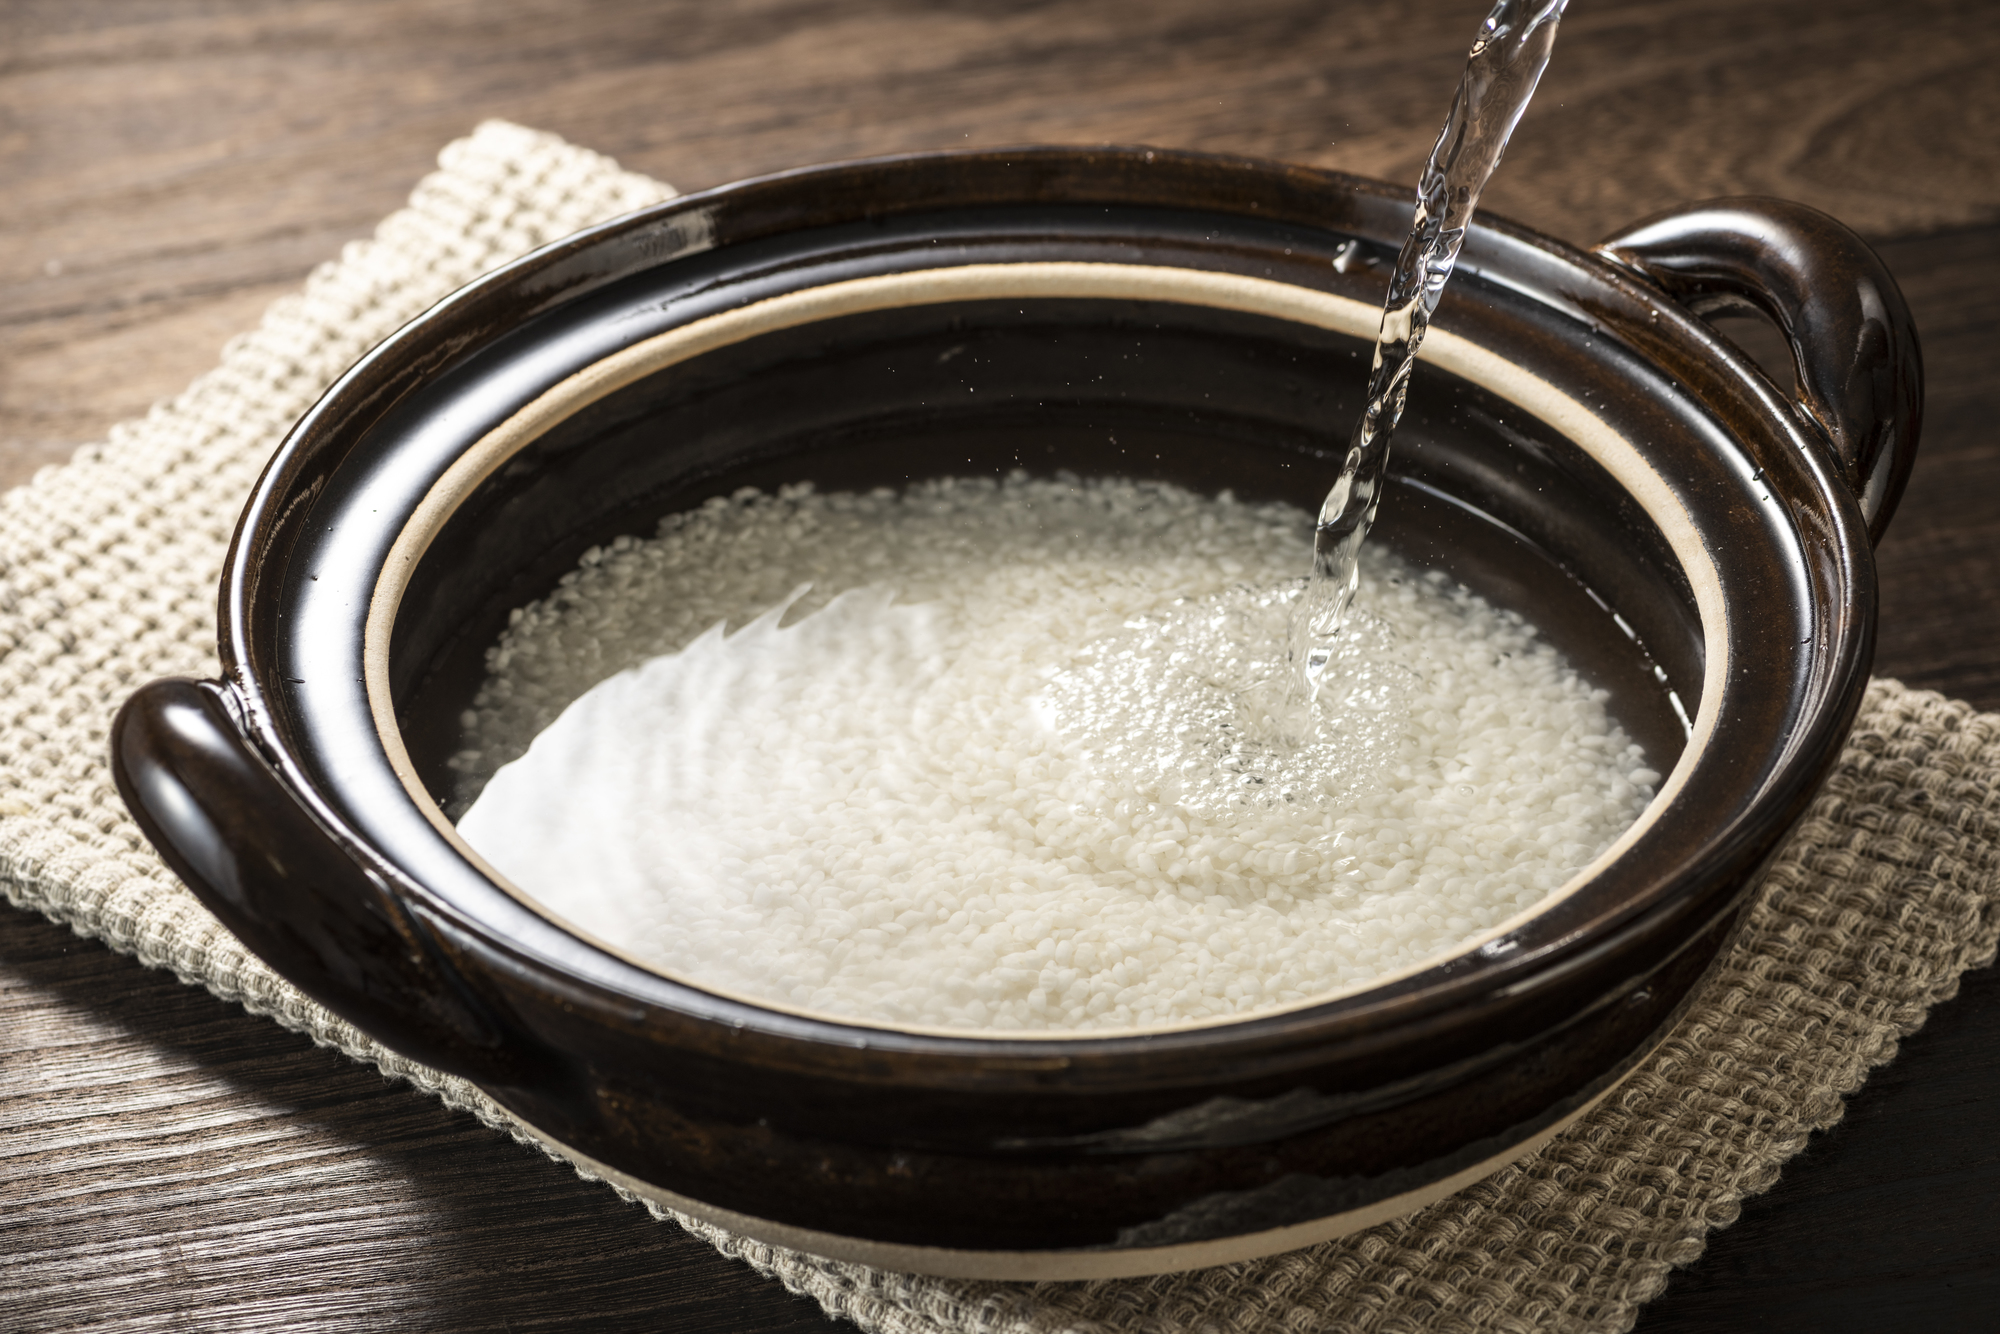 Photo: Pouring water into a pot of rice